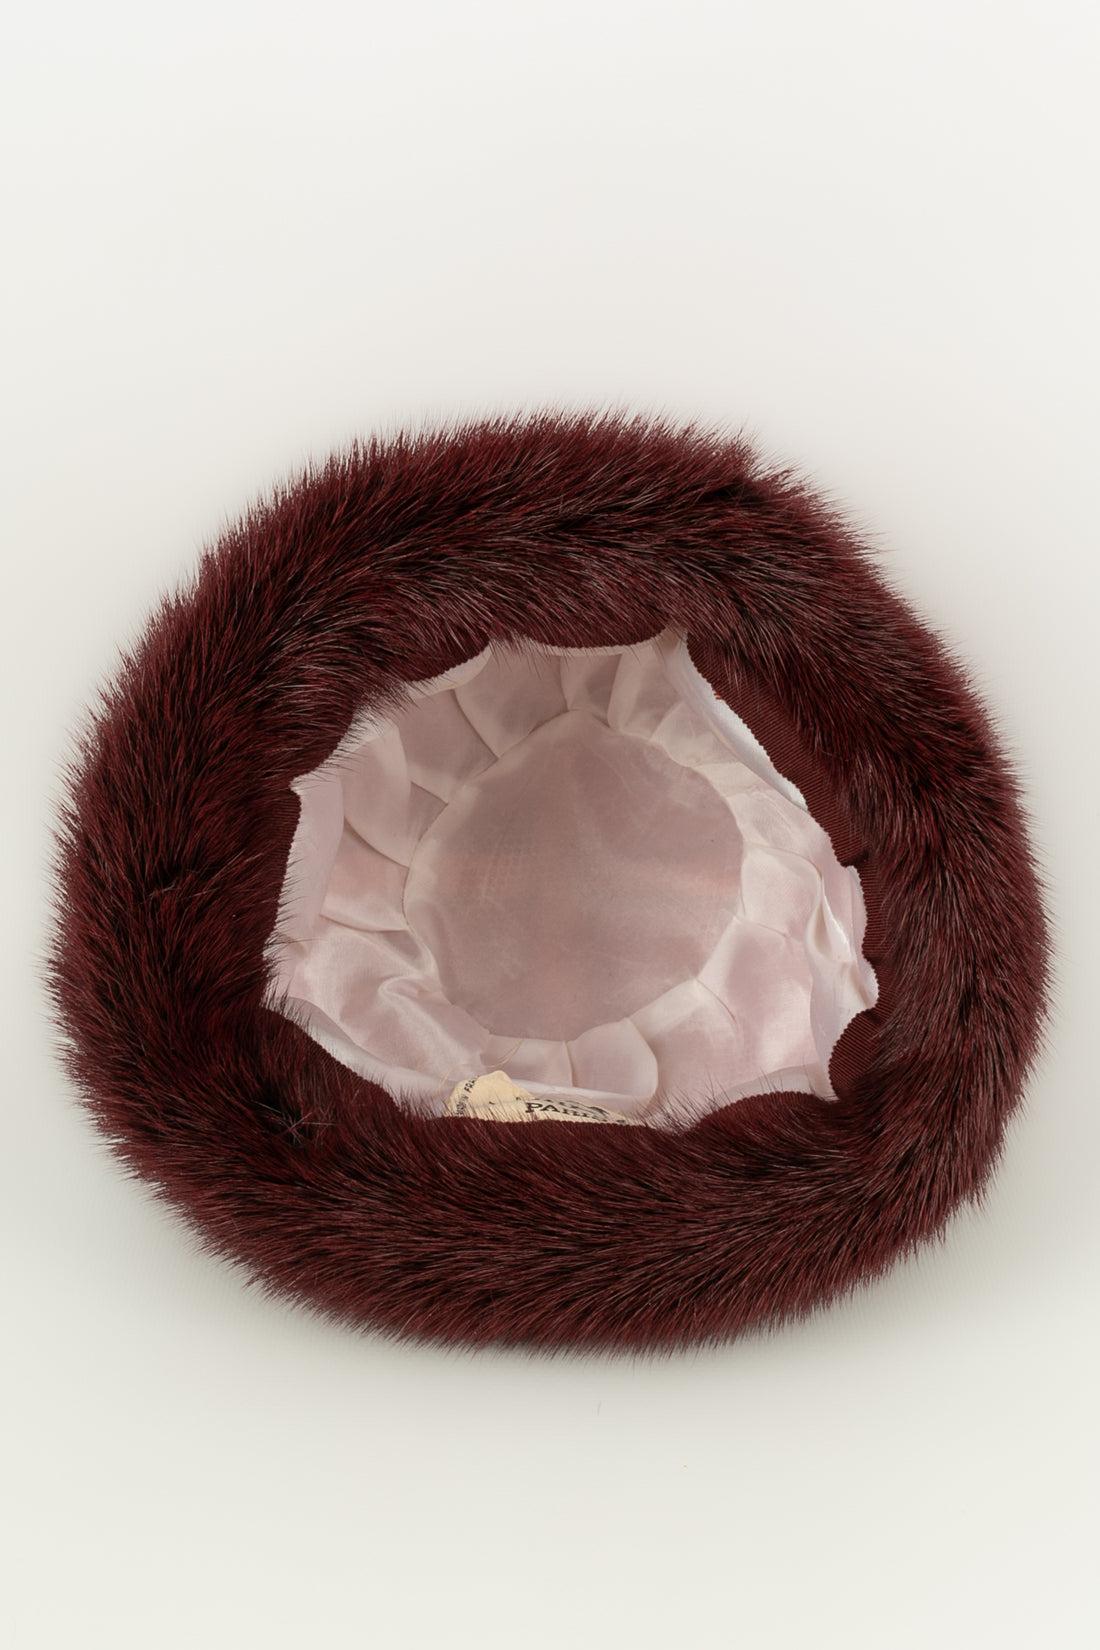 Hermès Hat in Dyed Mink Skin and Fur For Sale 3